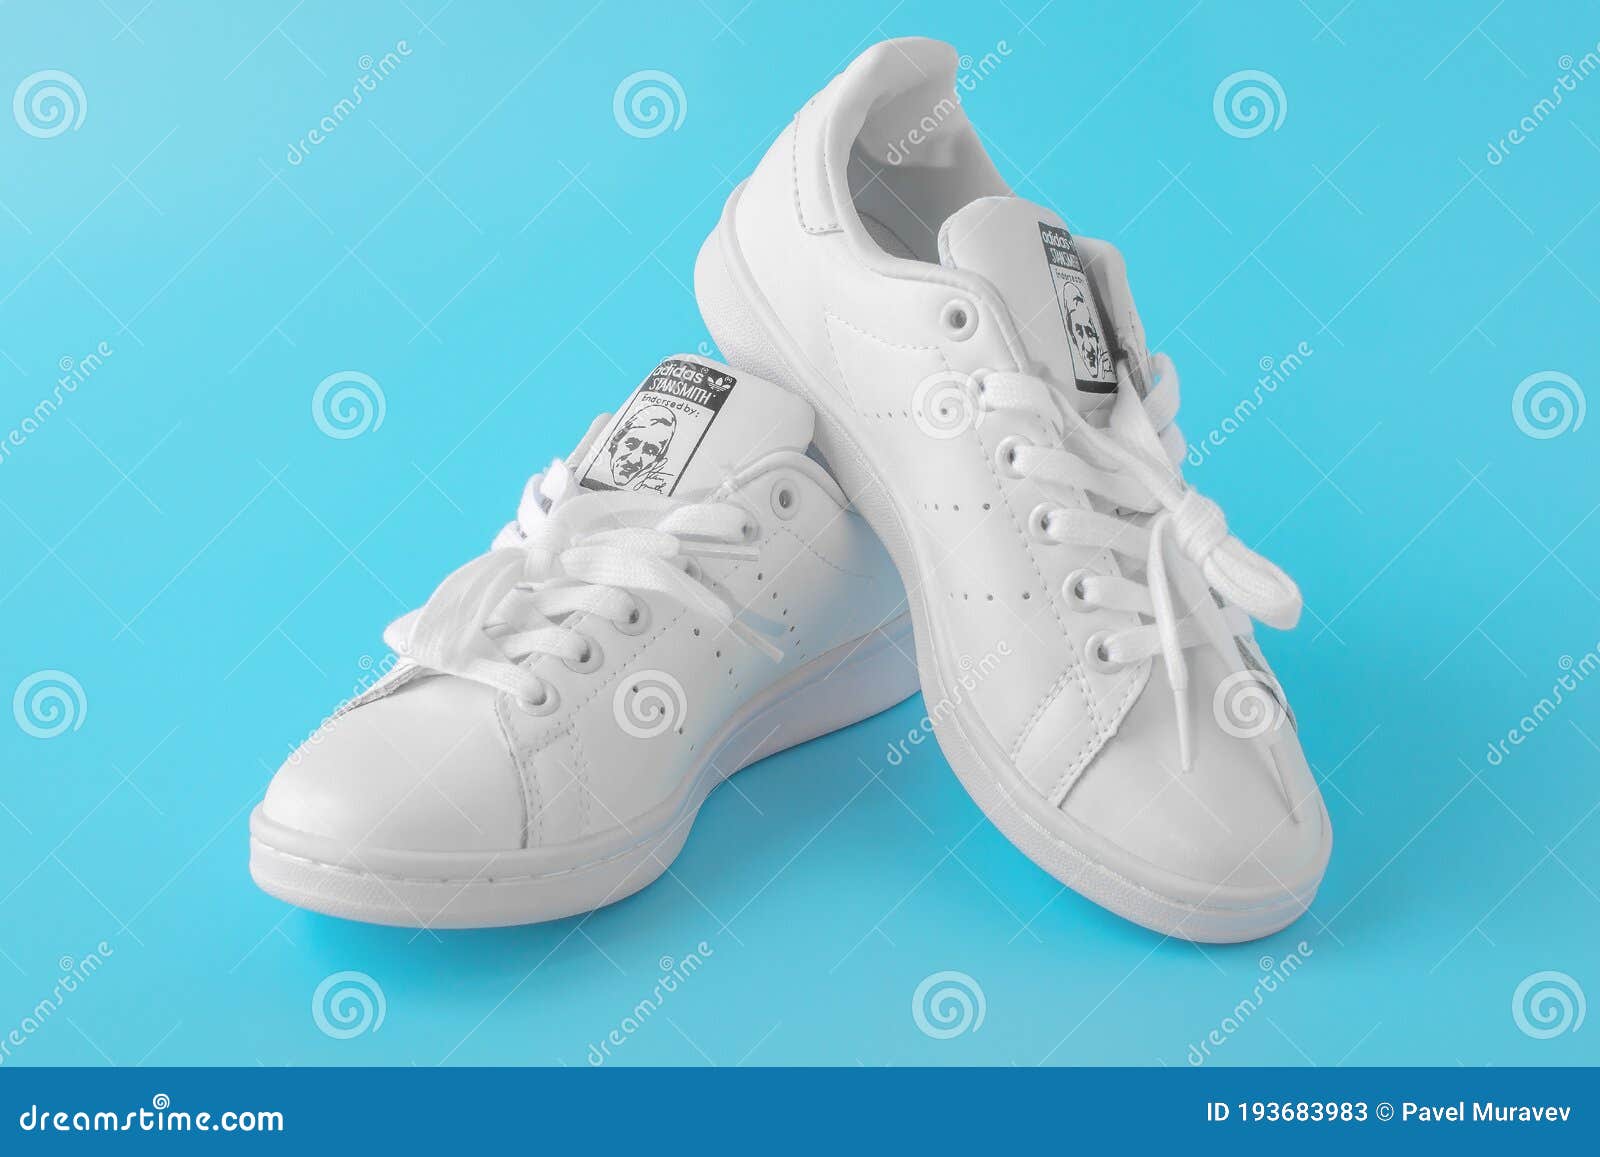 schipper Van God nemen Moscow, Russia - JULY 30, 2020: White Shoes Adidas Stan Smith, Photo of New  White Sneakers on Blue Background Editorial Stock Photo - Image of casual,  fitness: 193683983